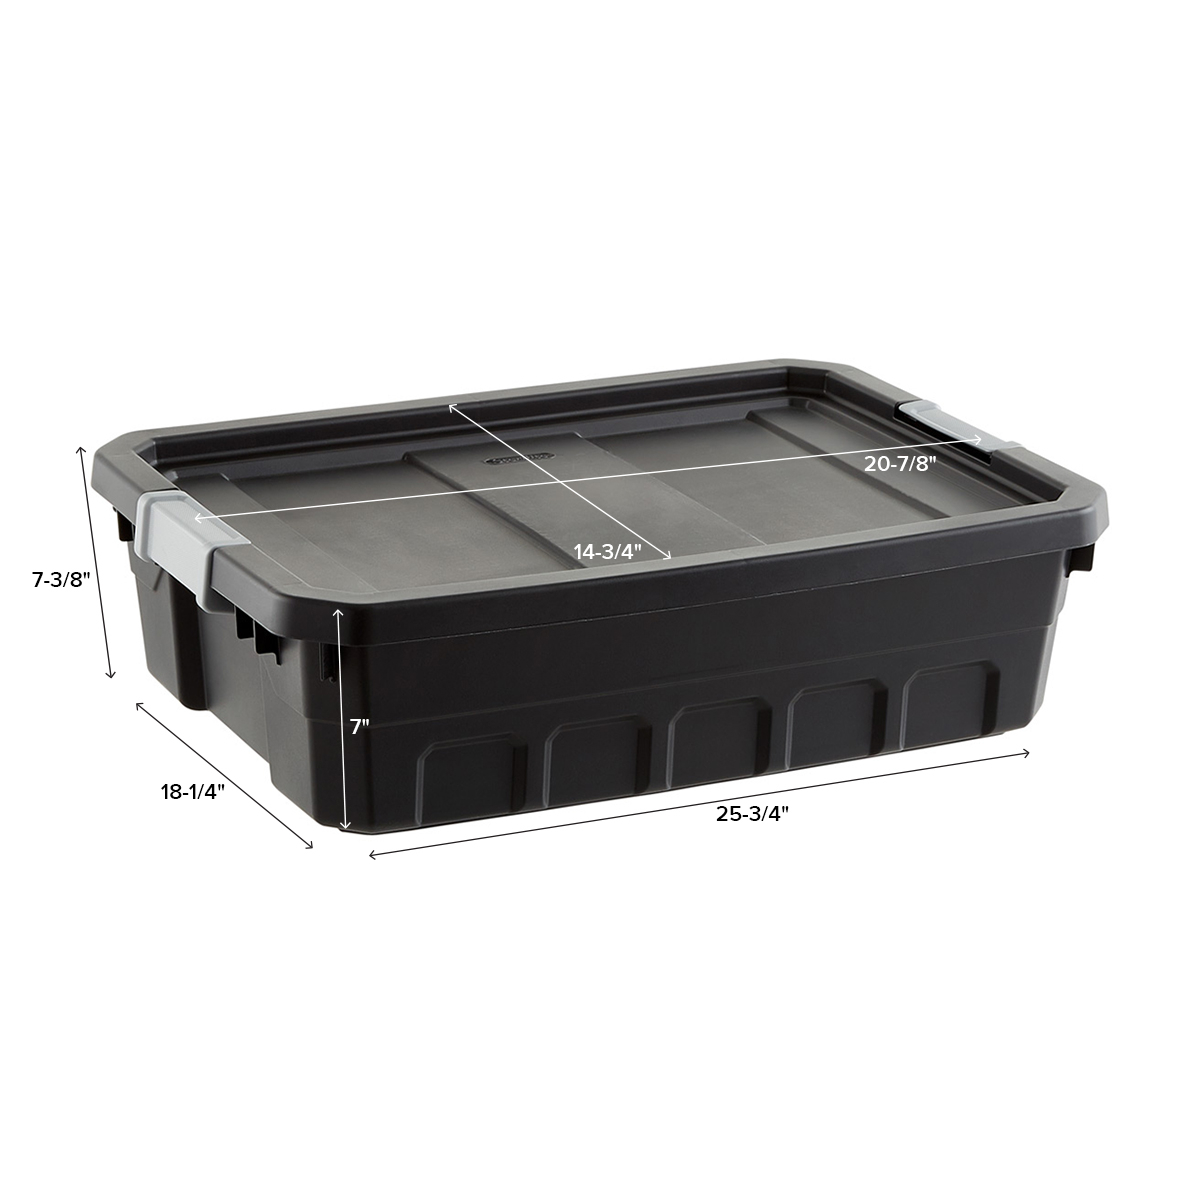 https://www.containerstore.com/catalogimages/414420/10074299-Stacker-Tote_10gal-Black-DI.jpg